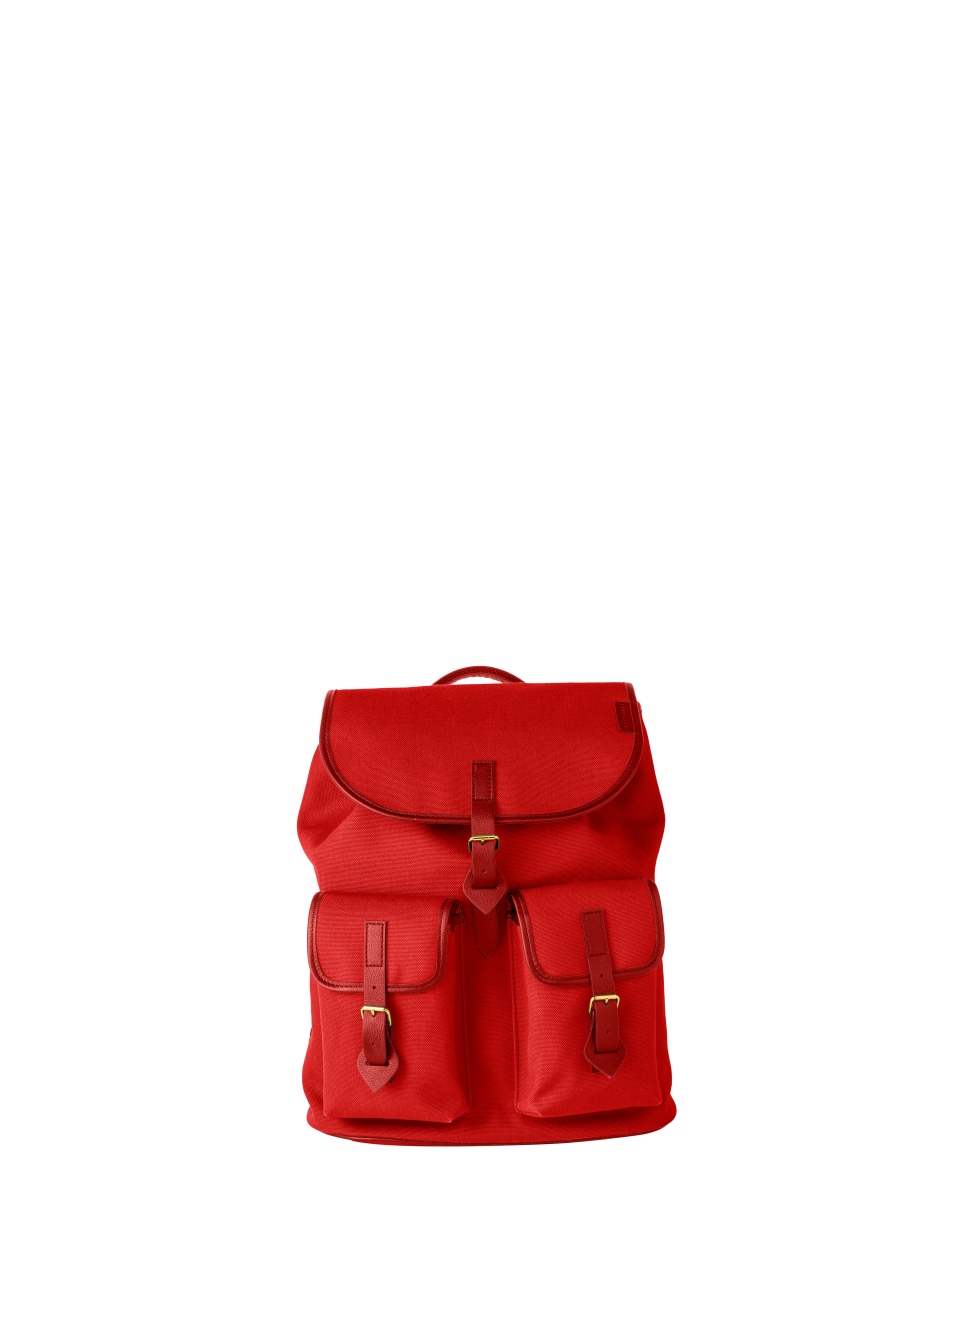 A backpack by L/Uniform.